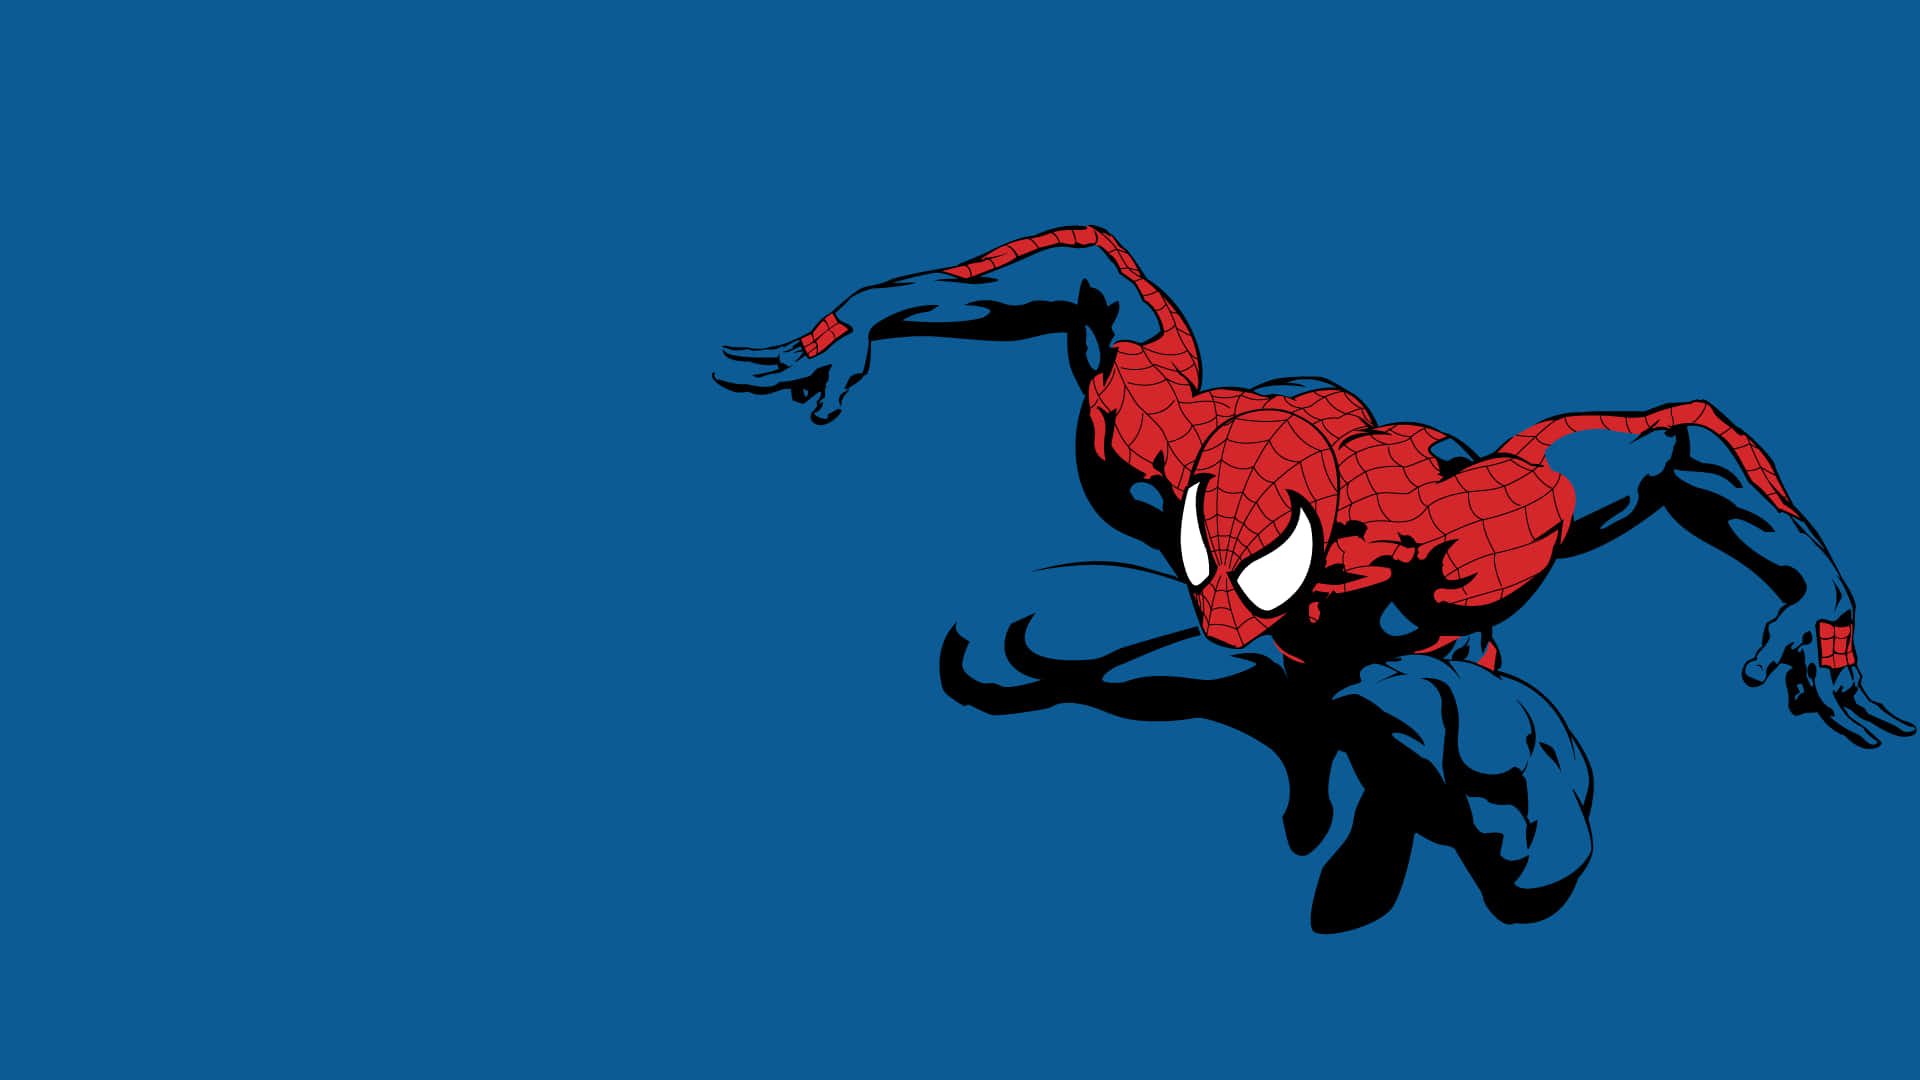 Download Spider Man Jumping In The Air On A Blue Background Wallpaper |  